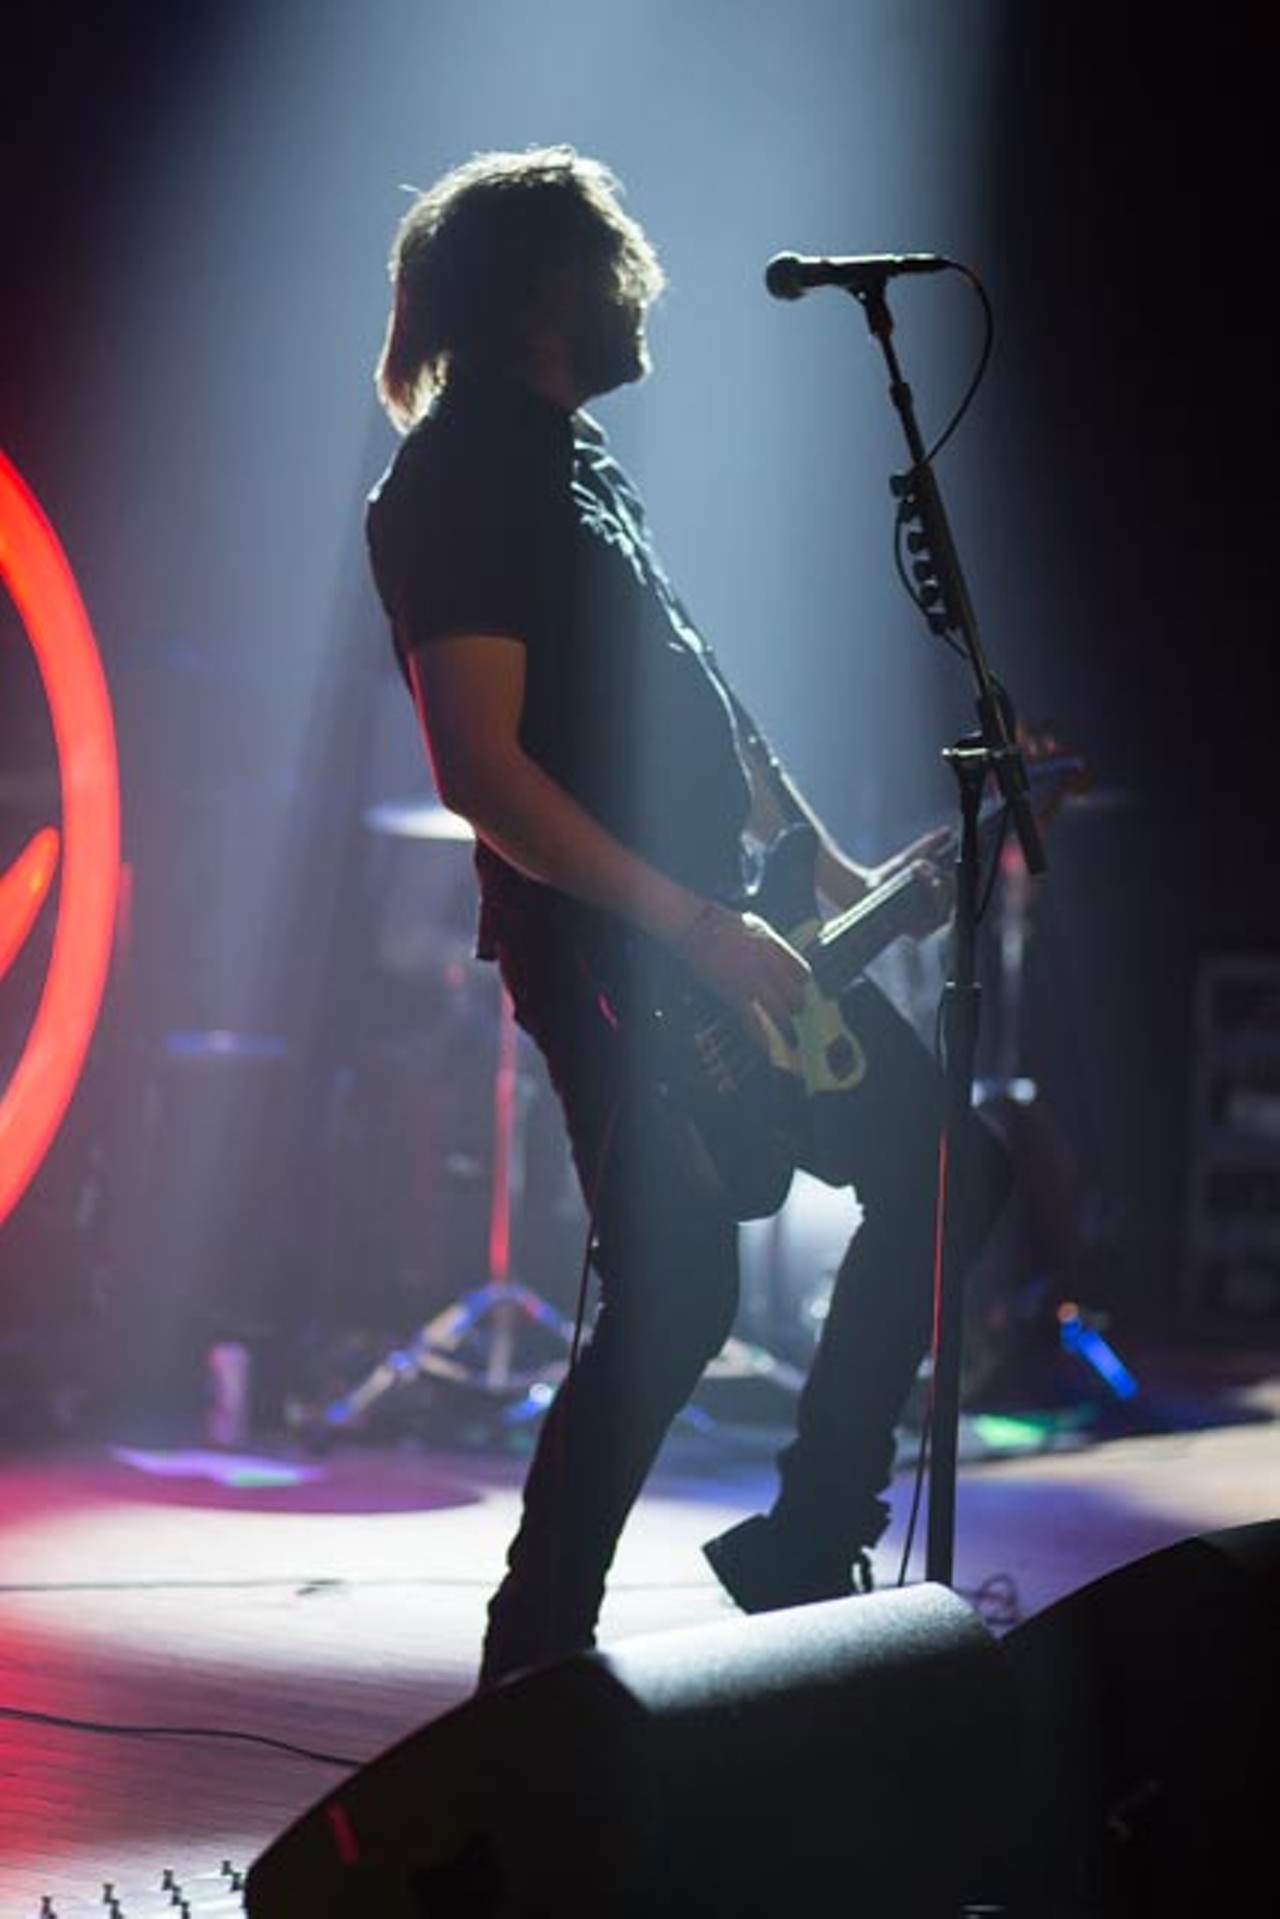 Yellowcard, Finch and One OK Rock Performing at House of Blues